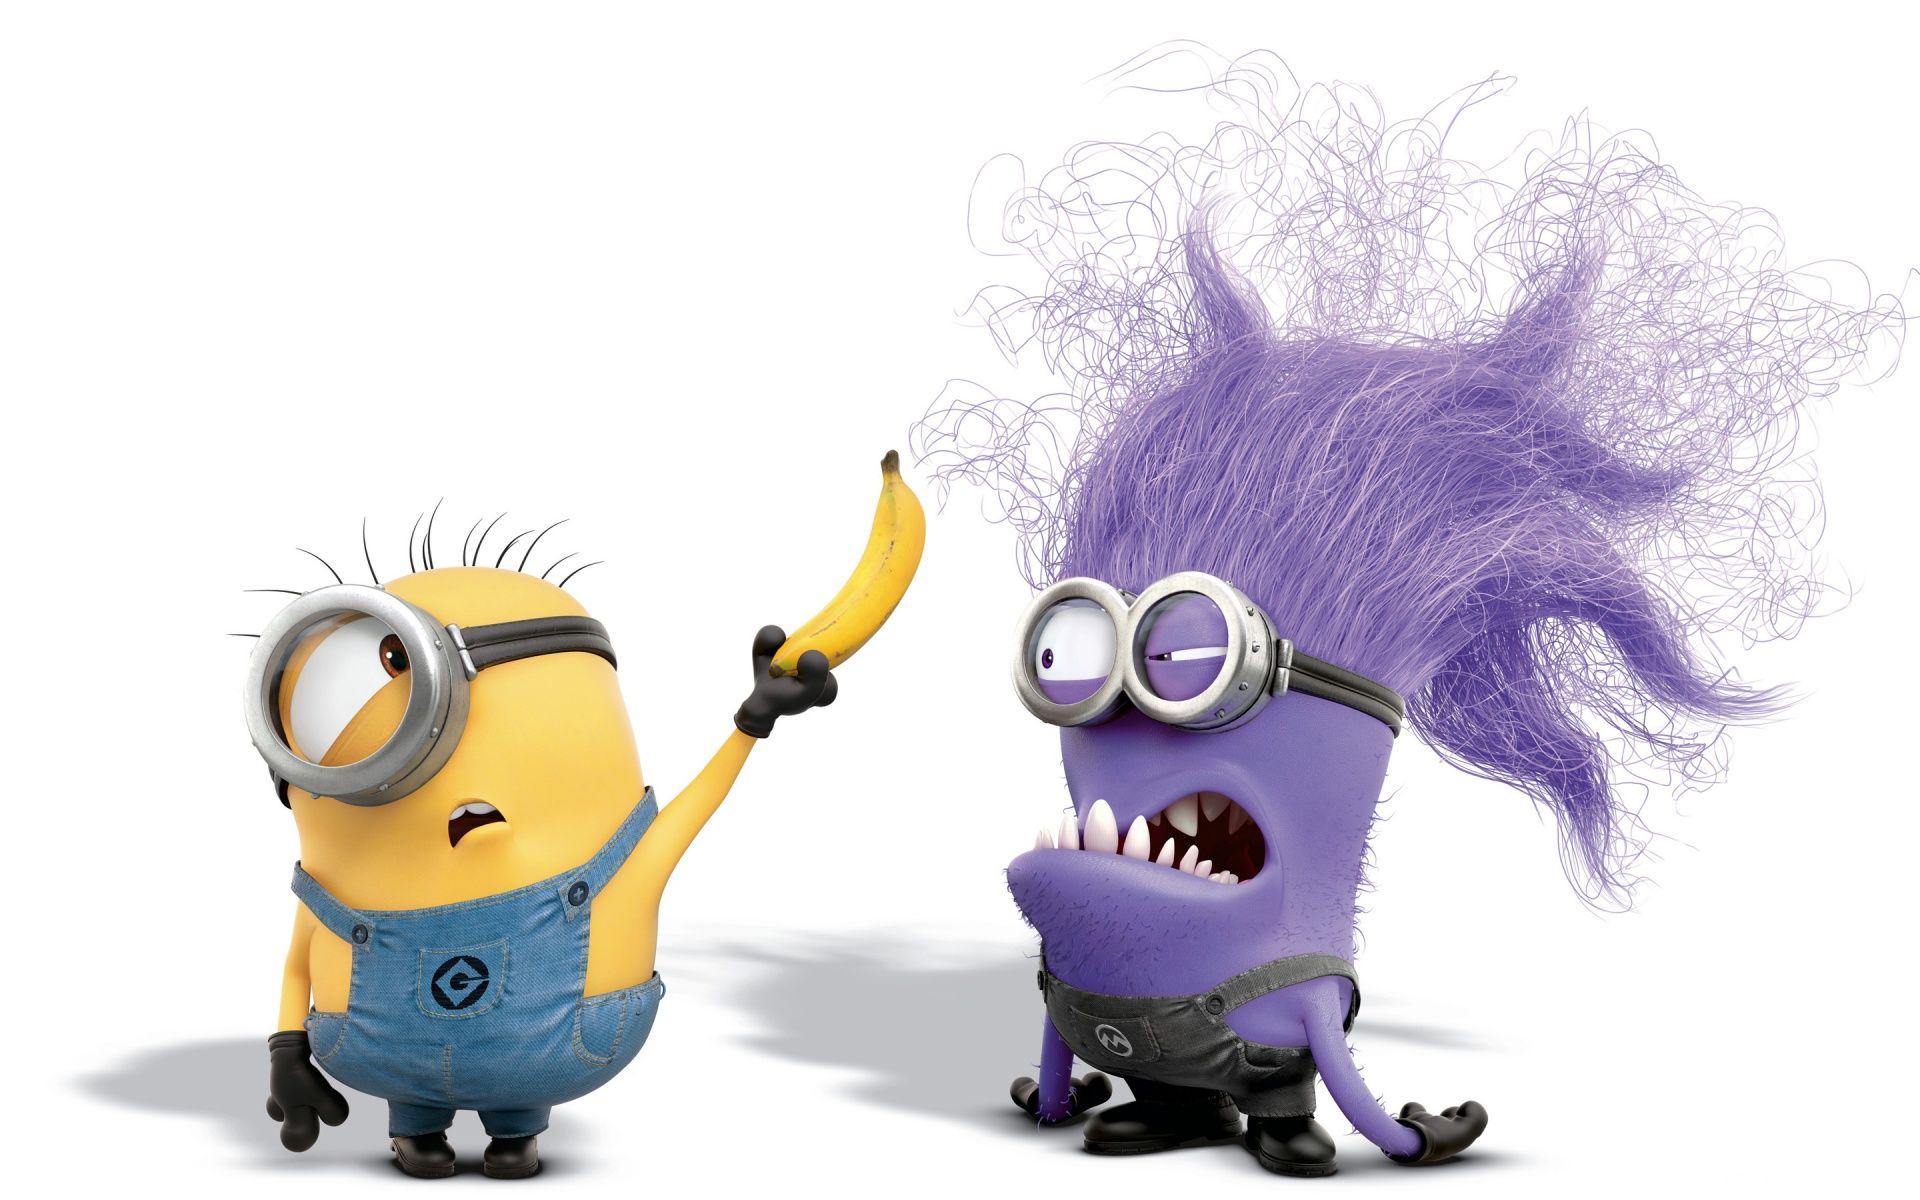 Evil Minion in Despicable Me 2 HD Wallpaper - iHD Wallpapers